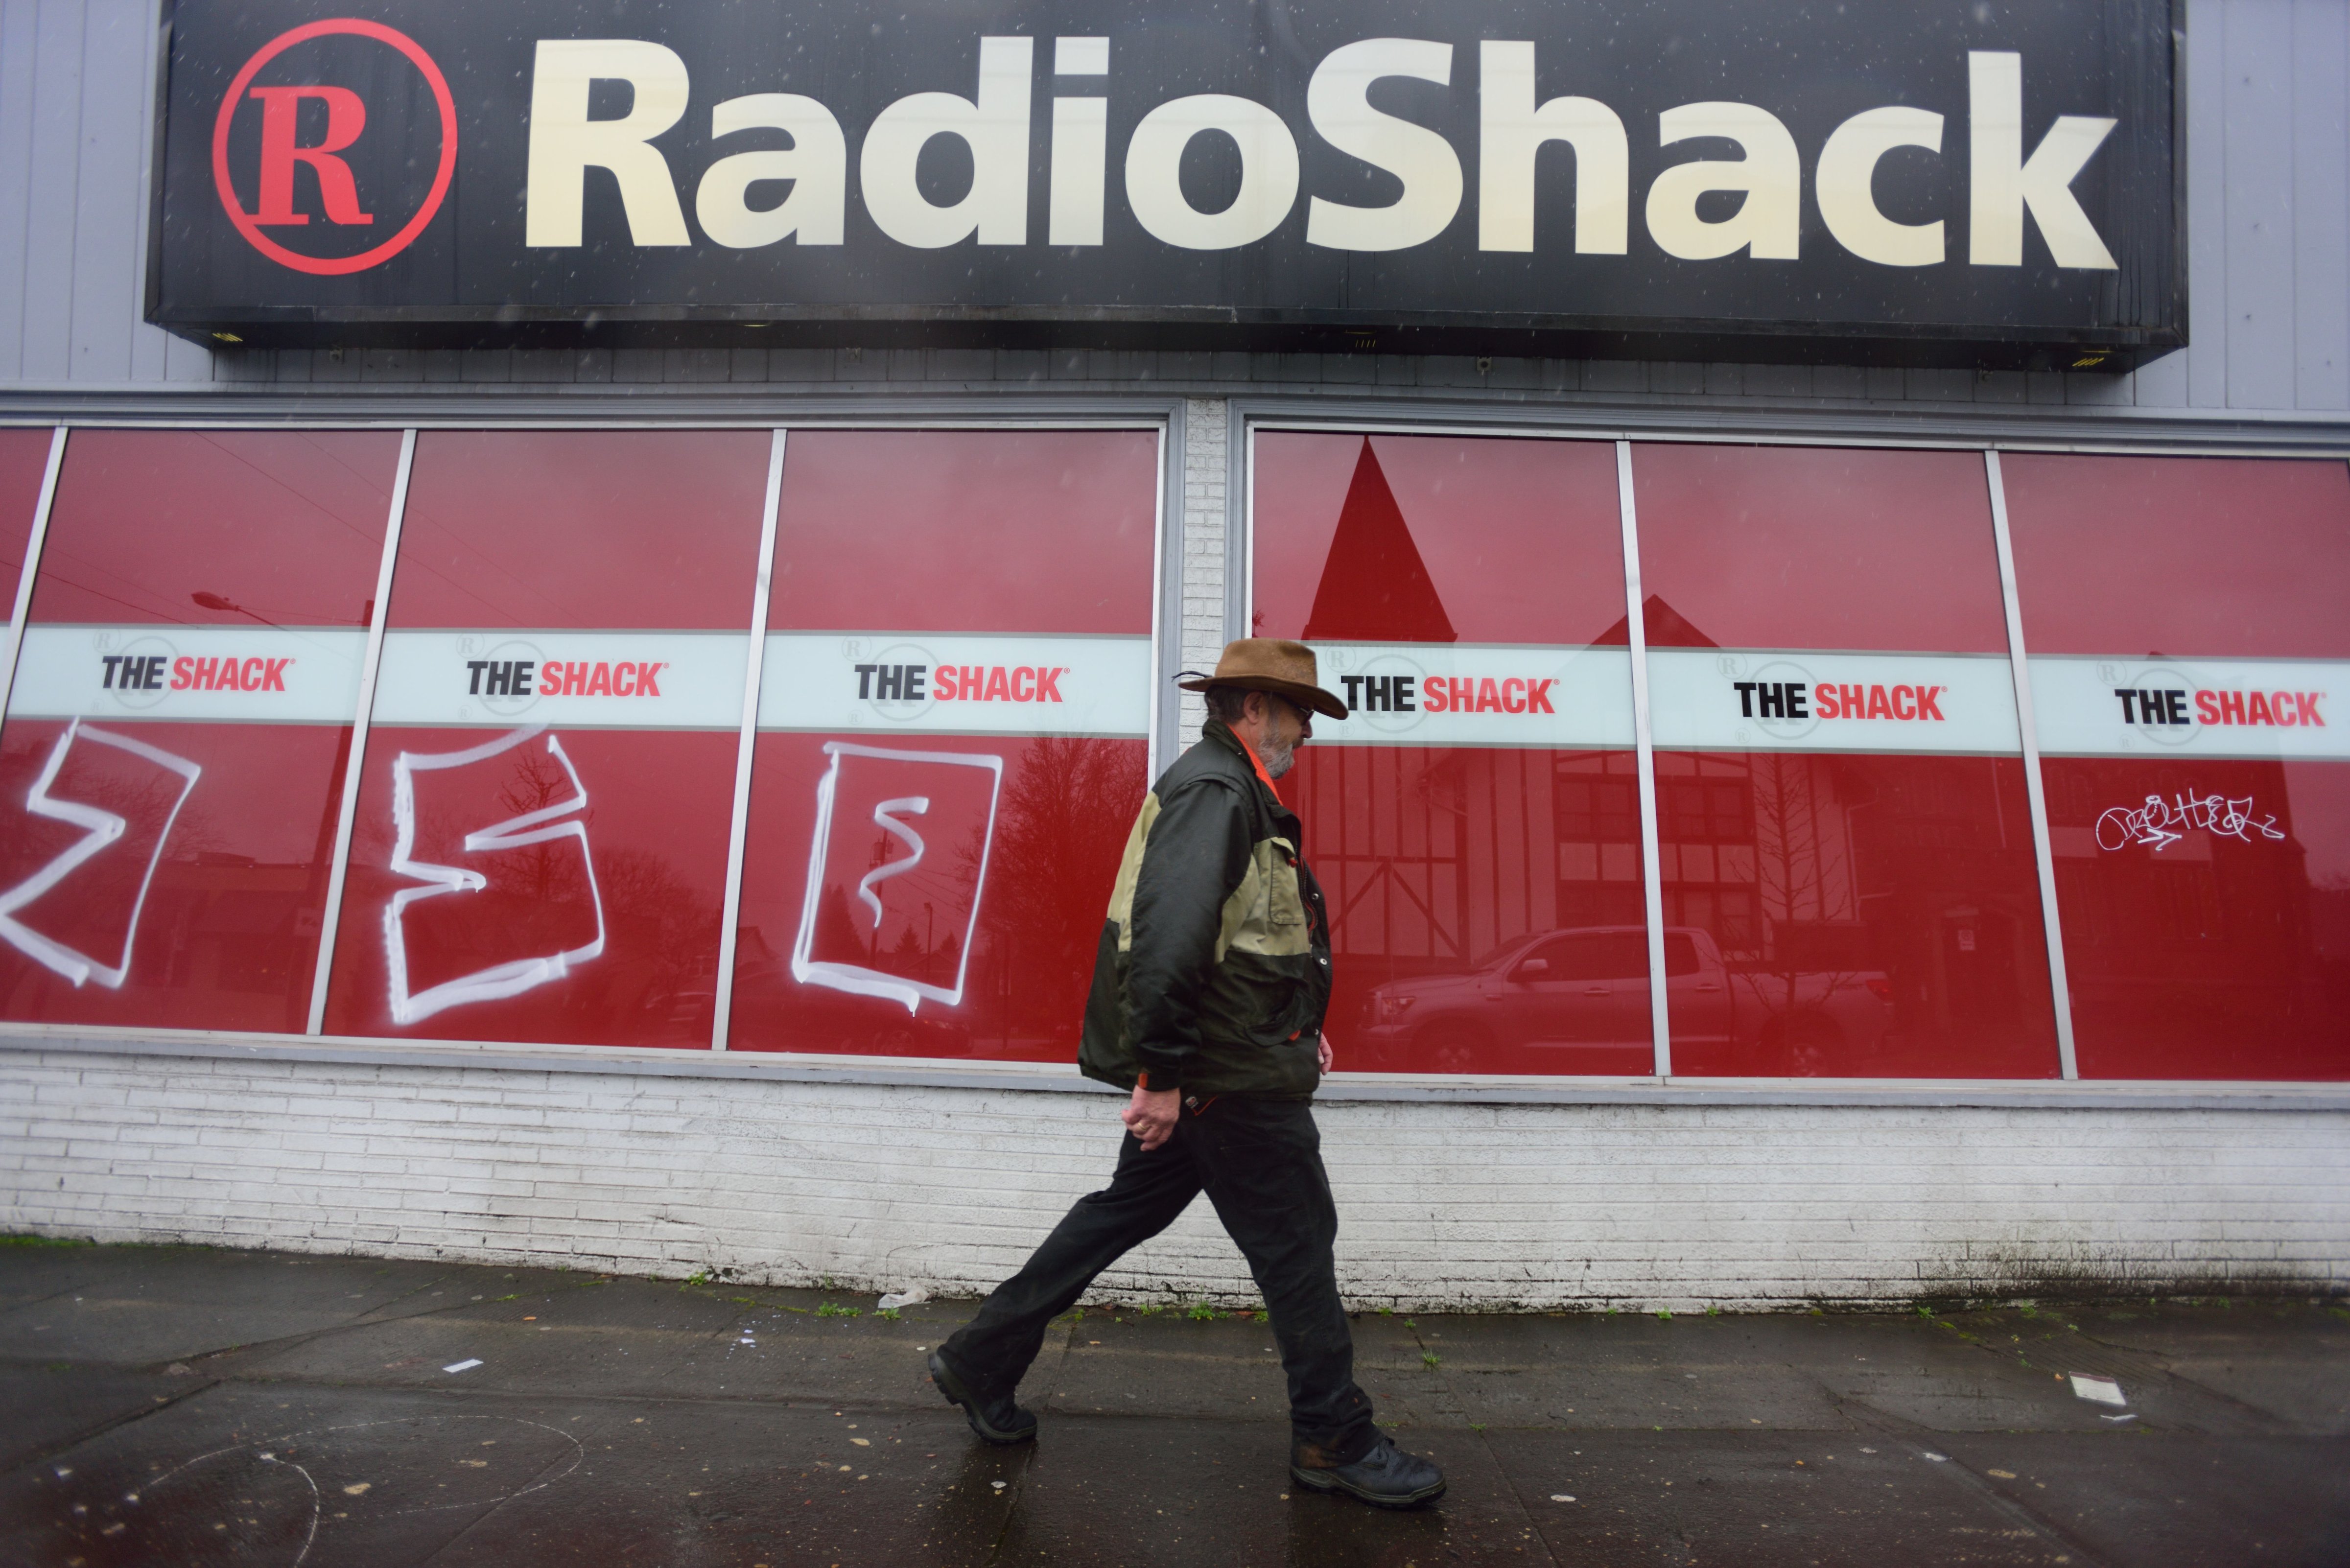 A RadioShack store pictured in North Portland, Ore., on Feb. 6, 2015. (Alex Milan Tracy—AP)